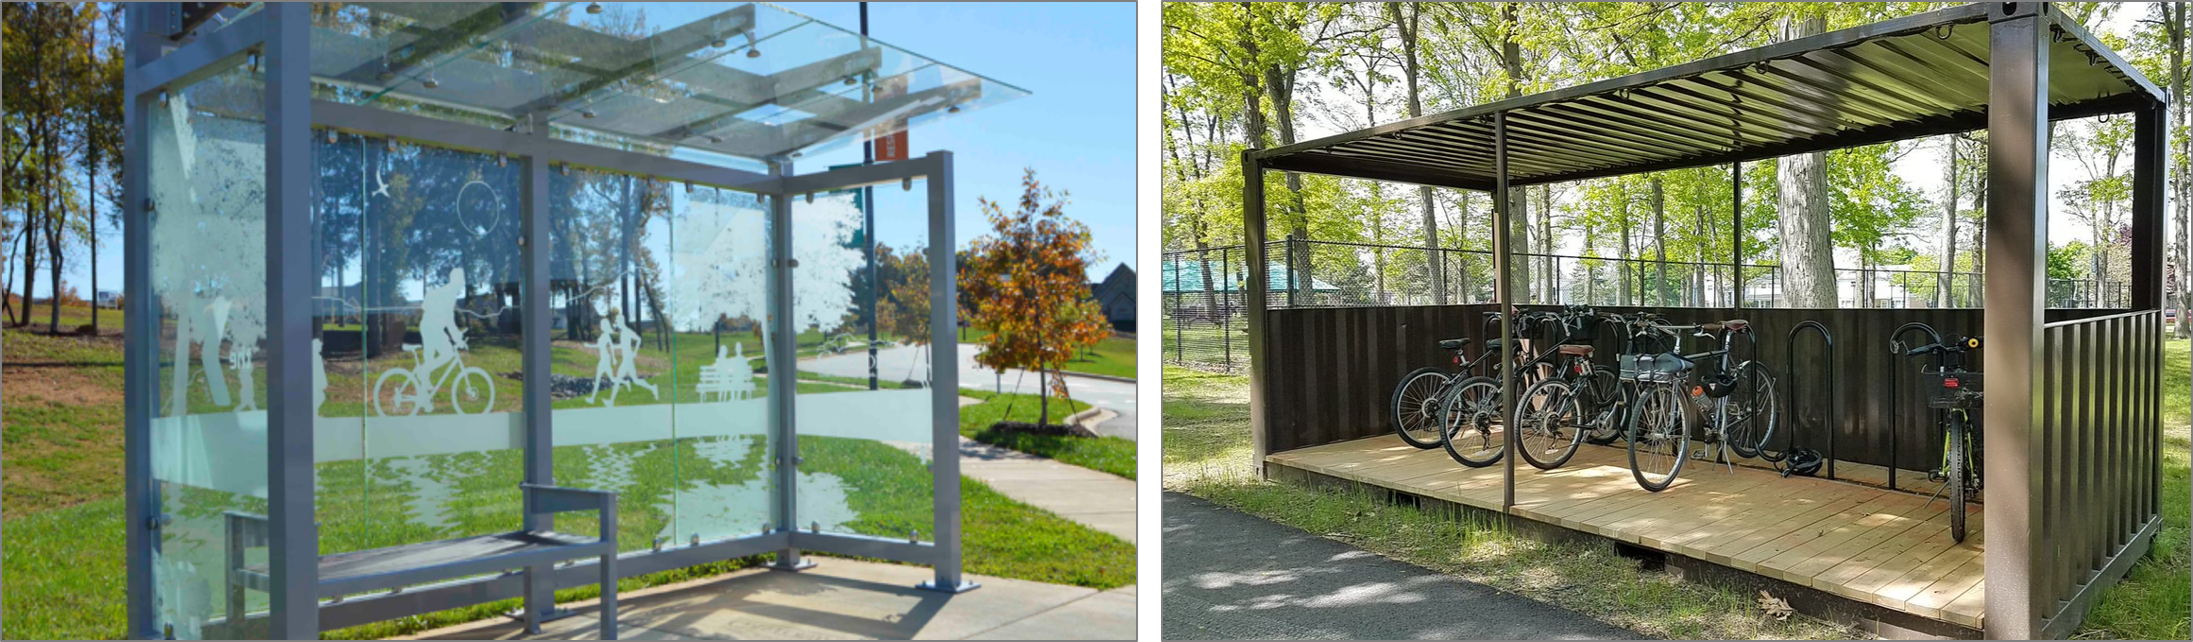 Image of a bus shelter

                                             Image of covered bike parking
                                             